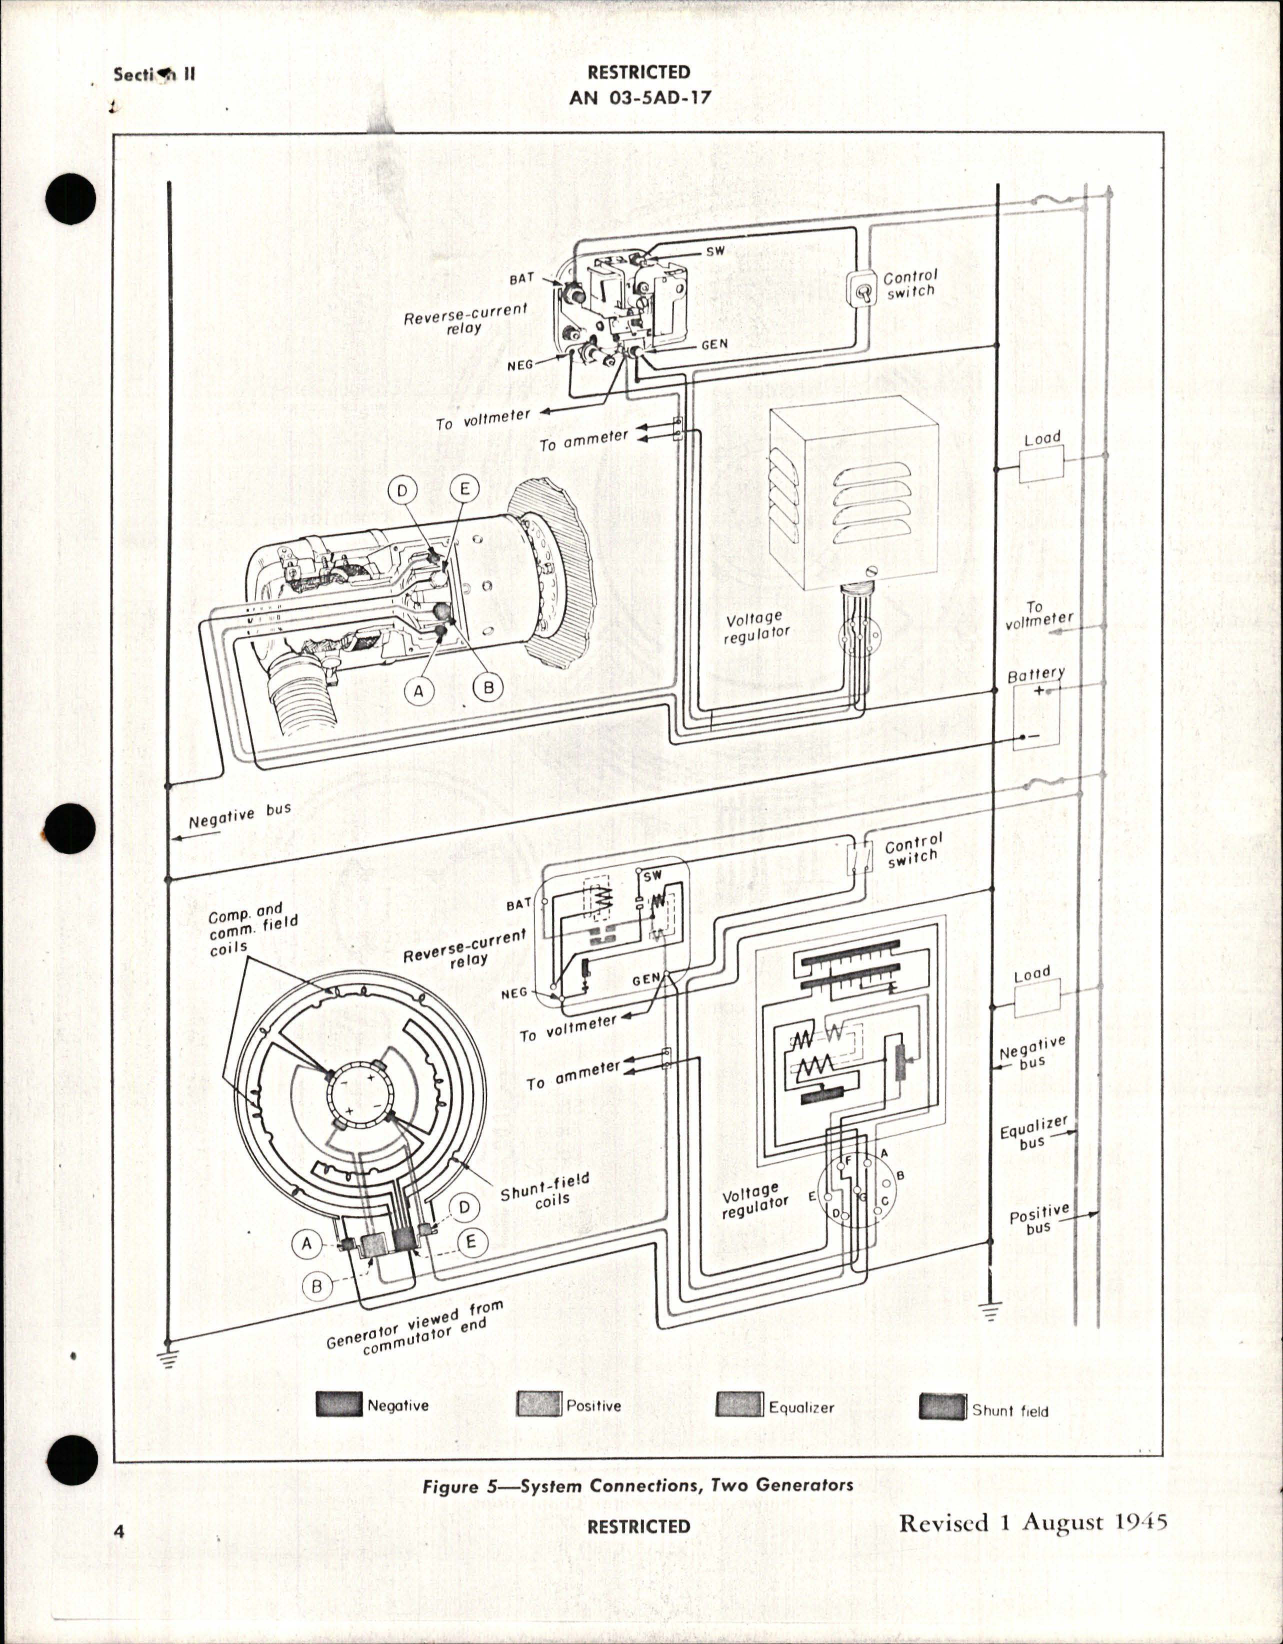 Sample page 9 from AirCorps Library document: Operation, Service and Overhaul Instructions with Parts Catalog for Aircraft Generators - Models 2CM73B1 and 2CM73B5 